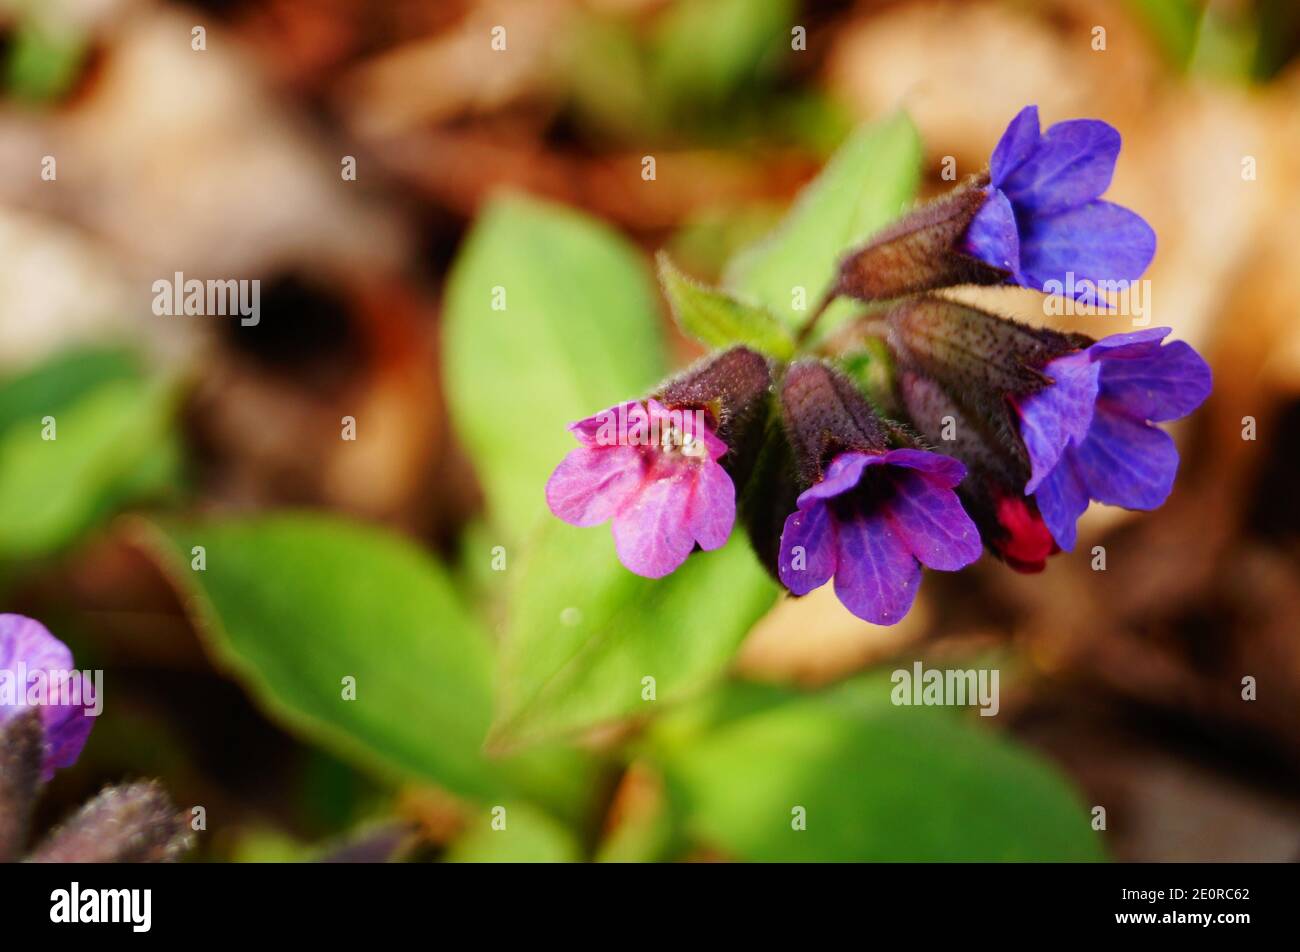 Lungwort flowers with delicate blue, purple and pink petals on a stem with green leaves on a spring day Stock Photo